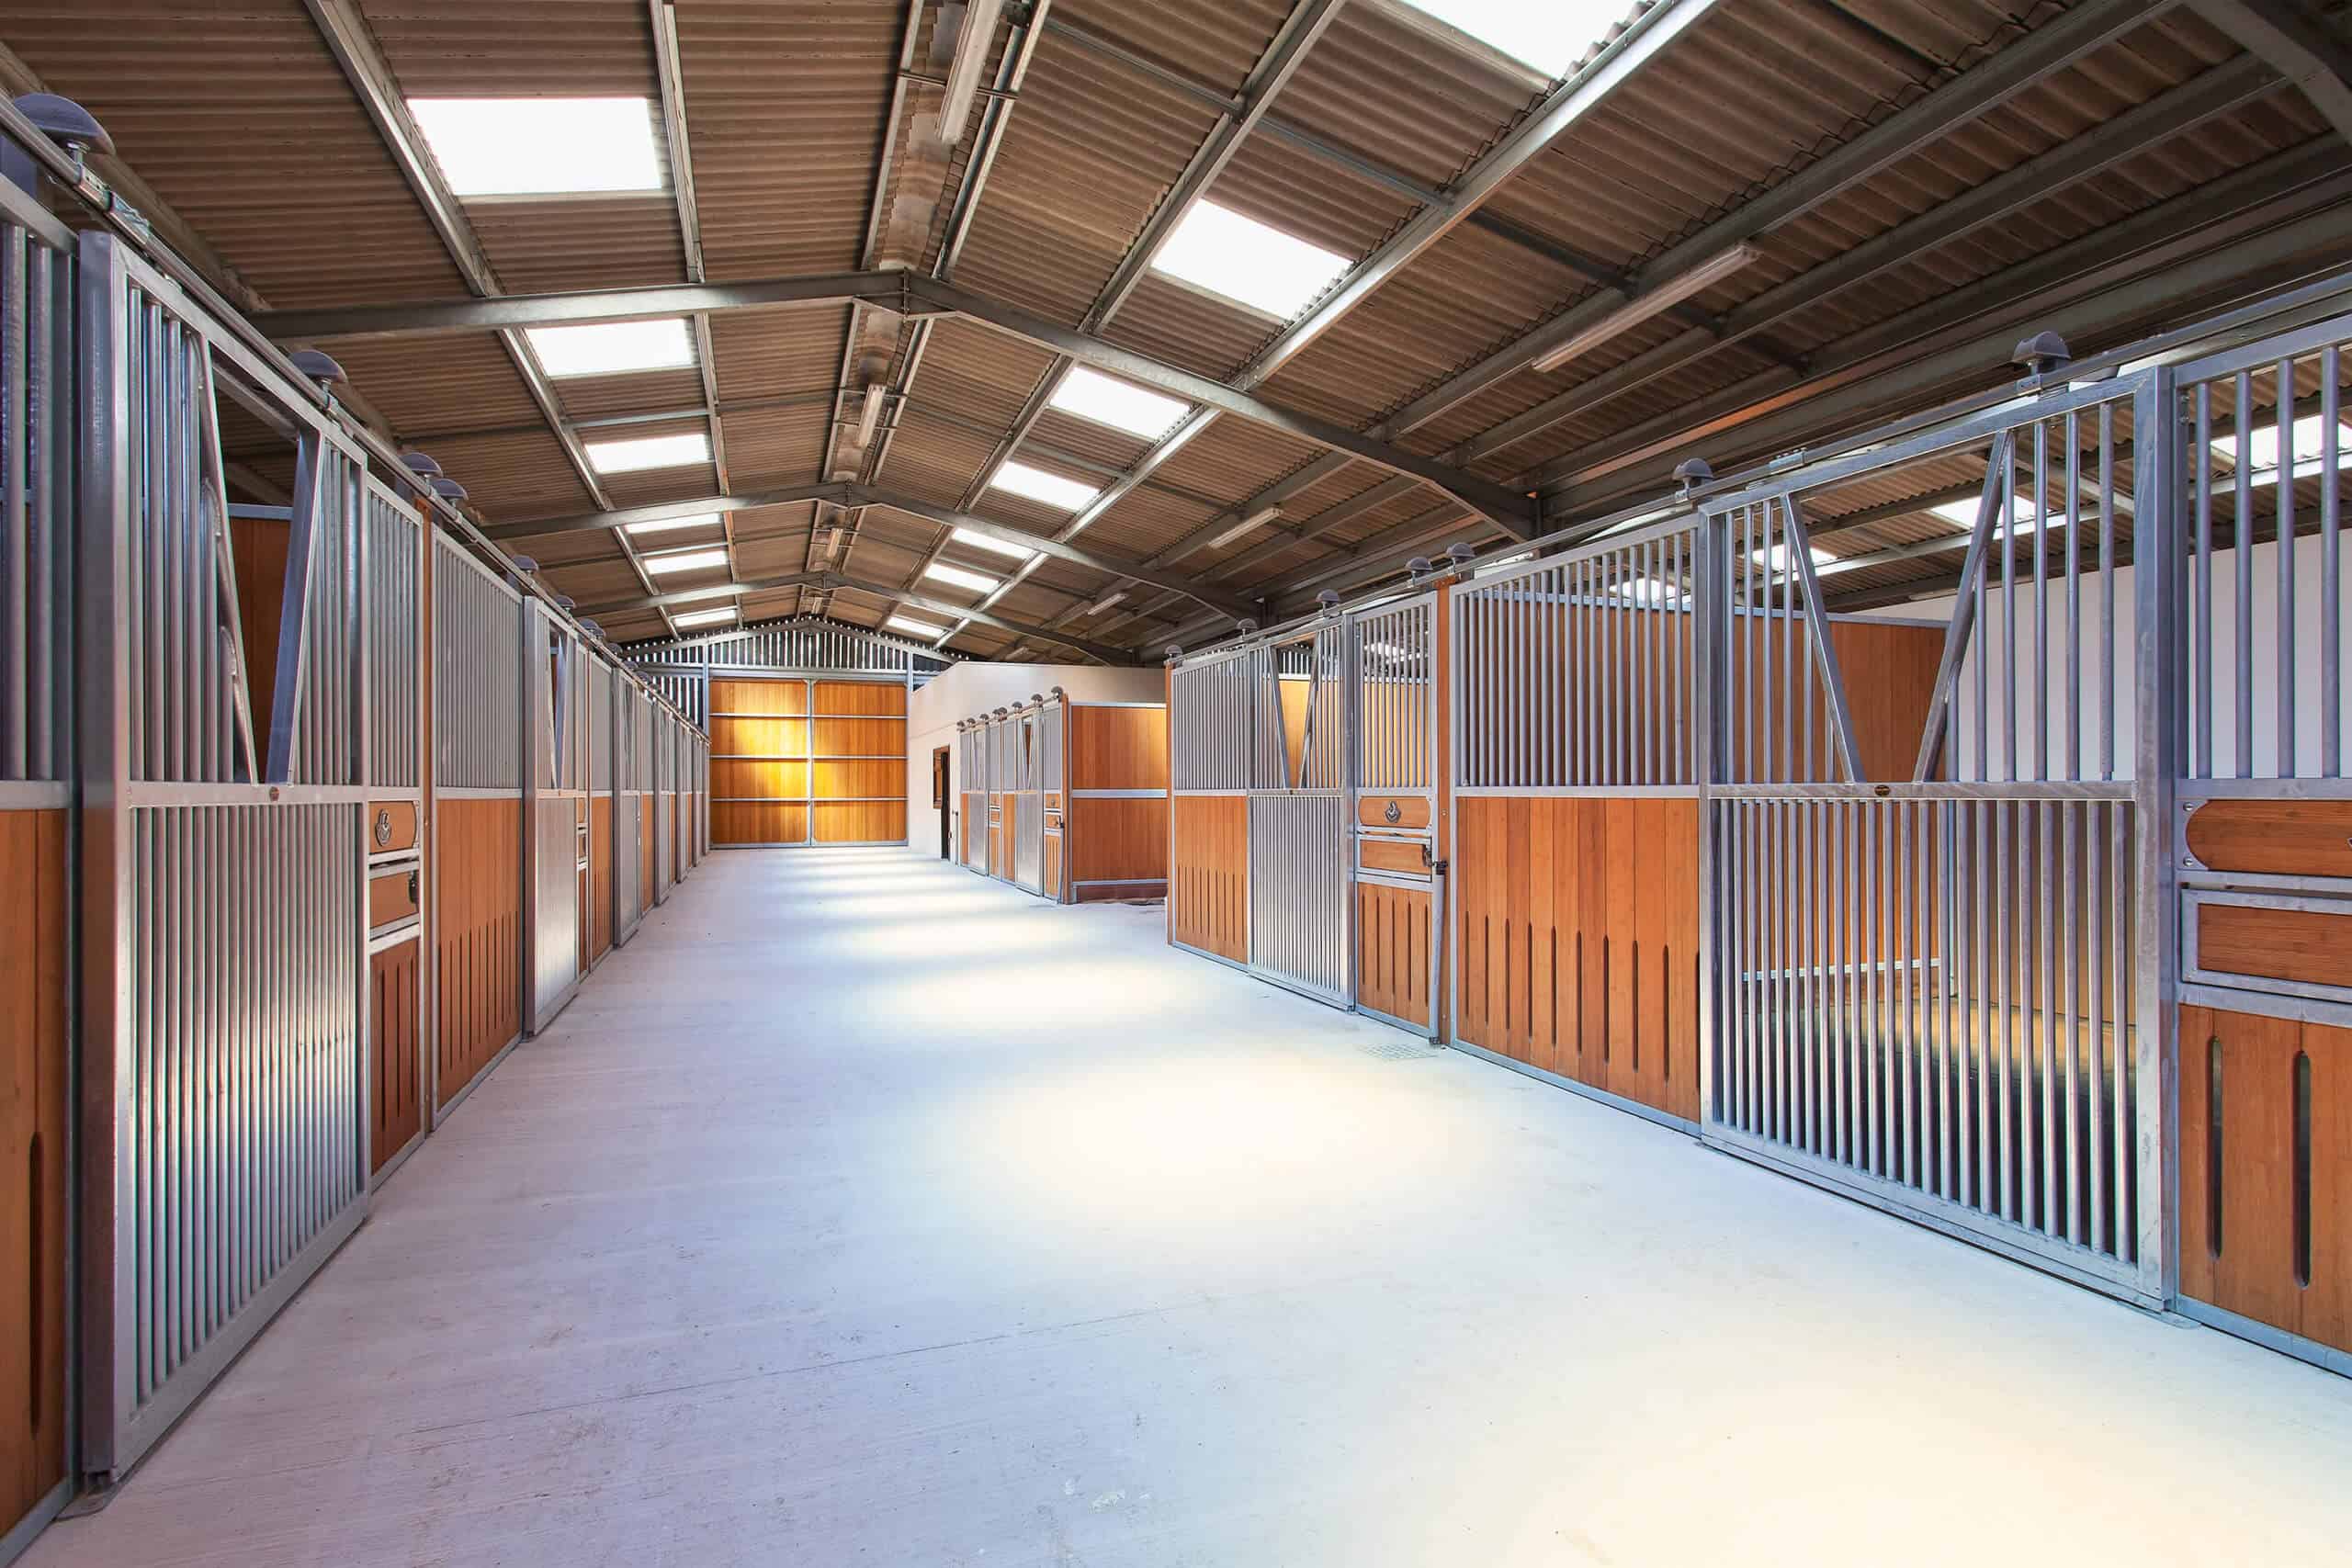 Lambourn Woodlands stables